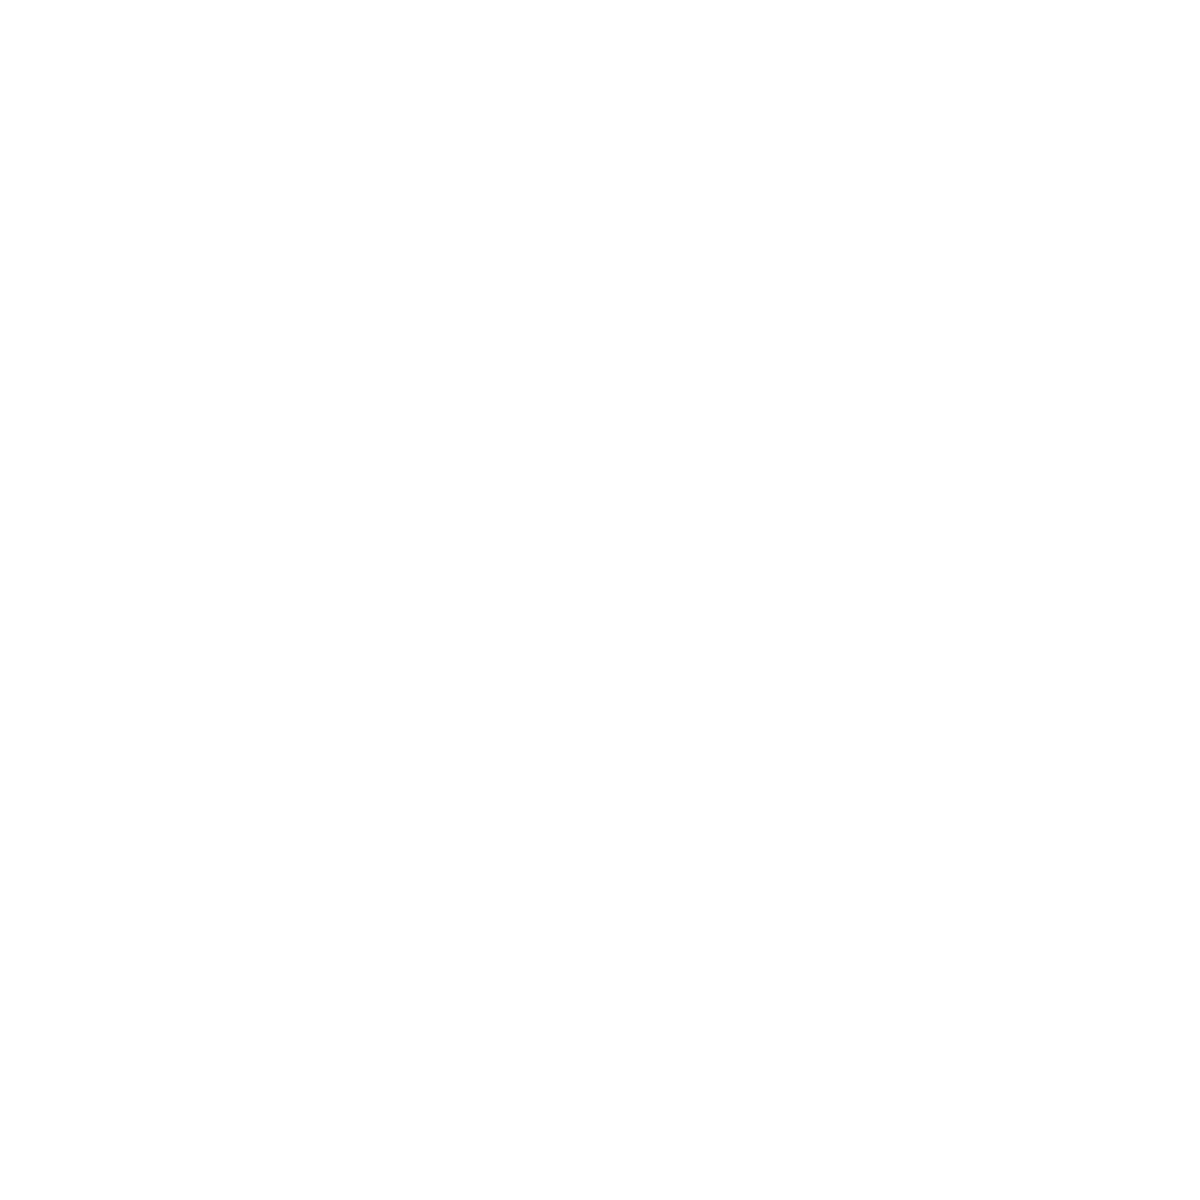 3Sixty Care